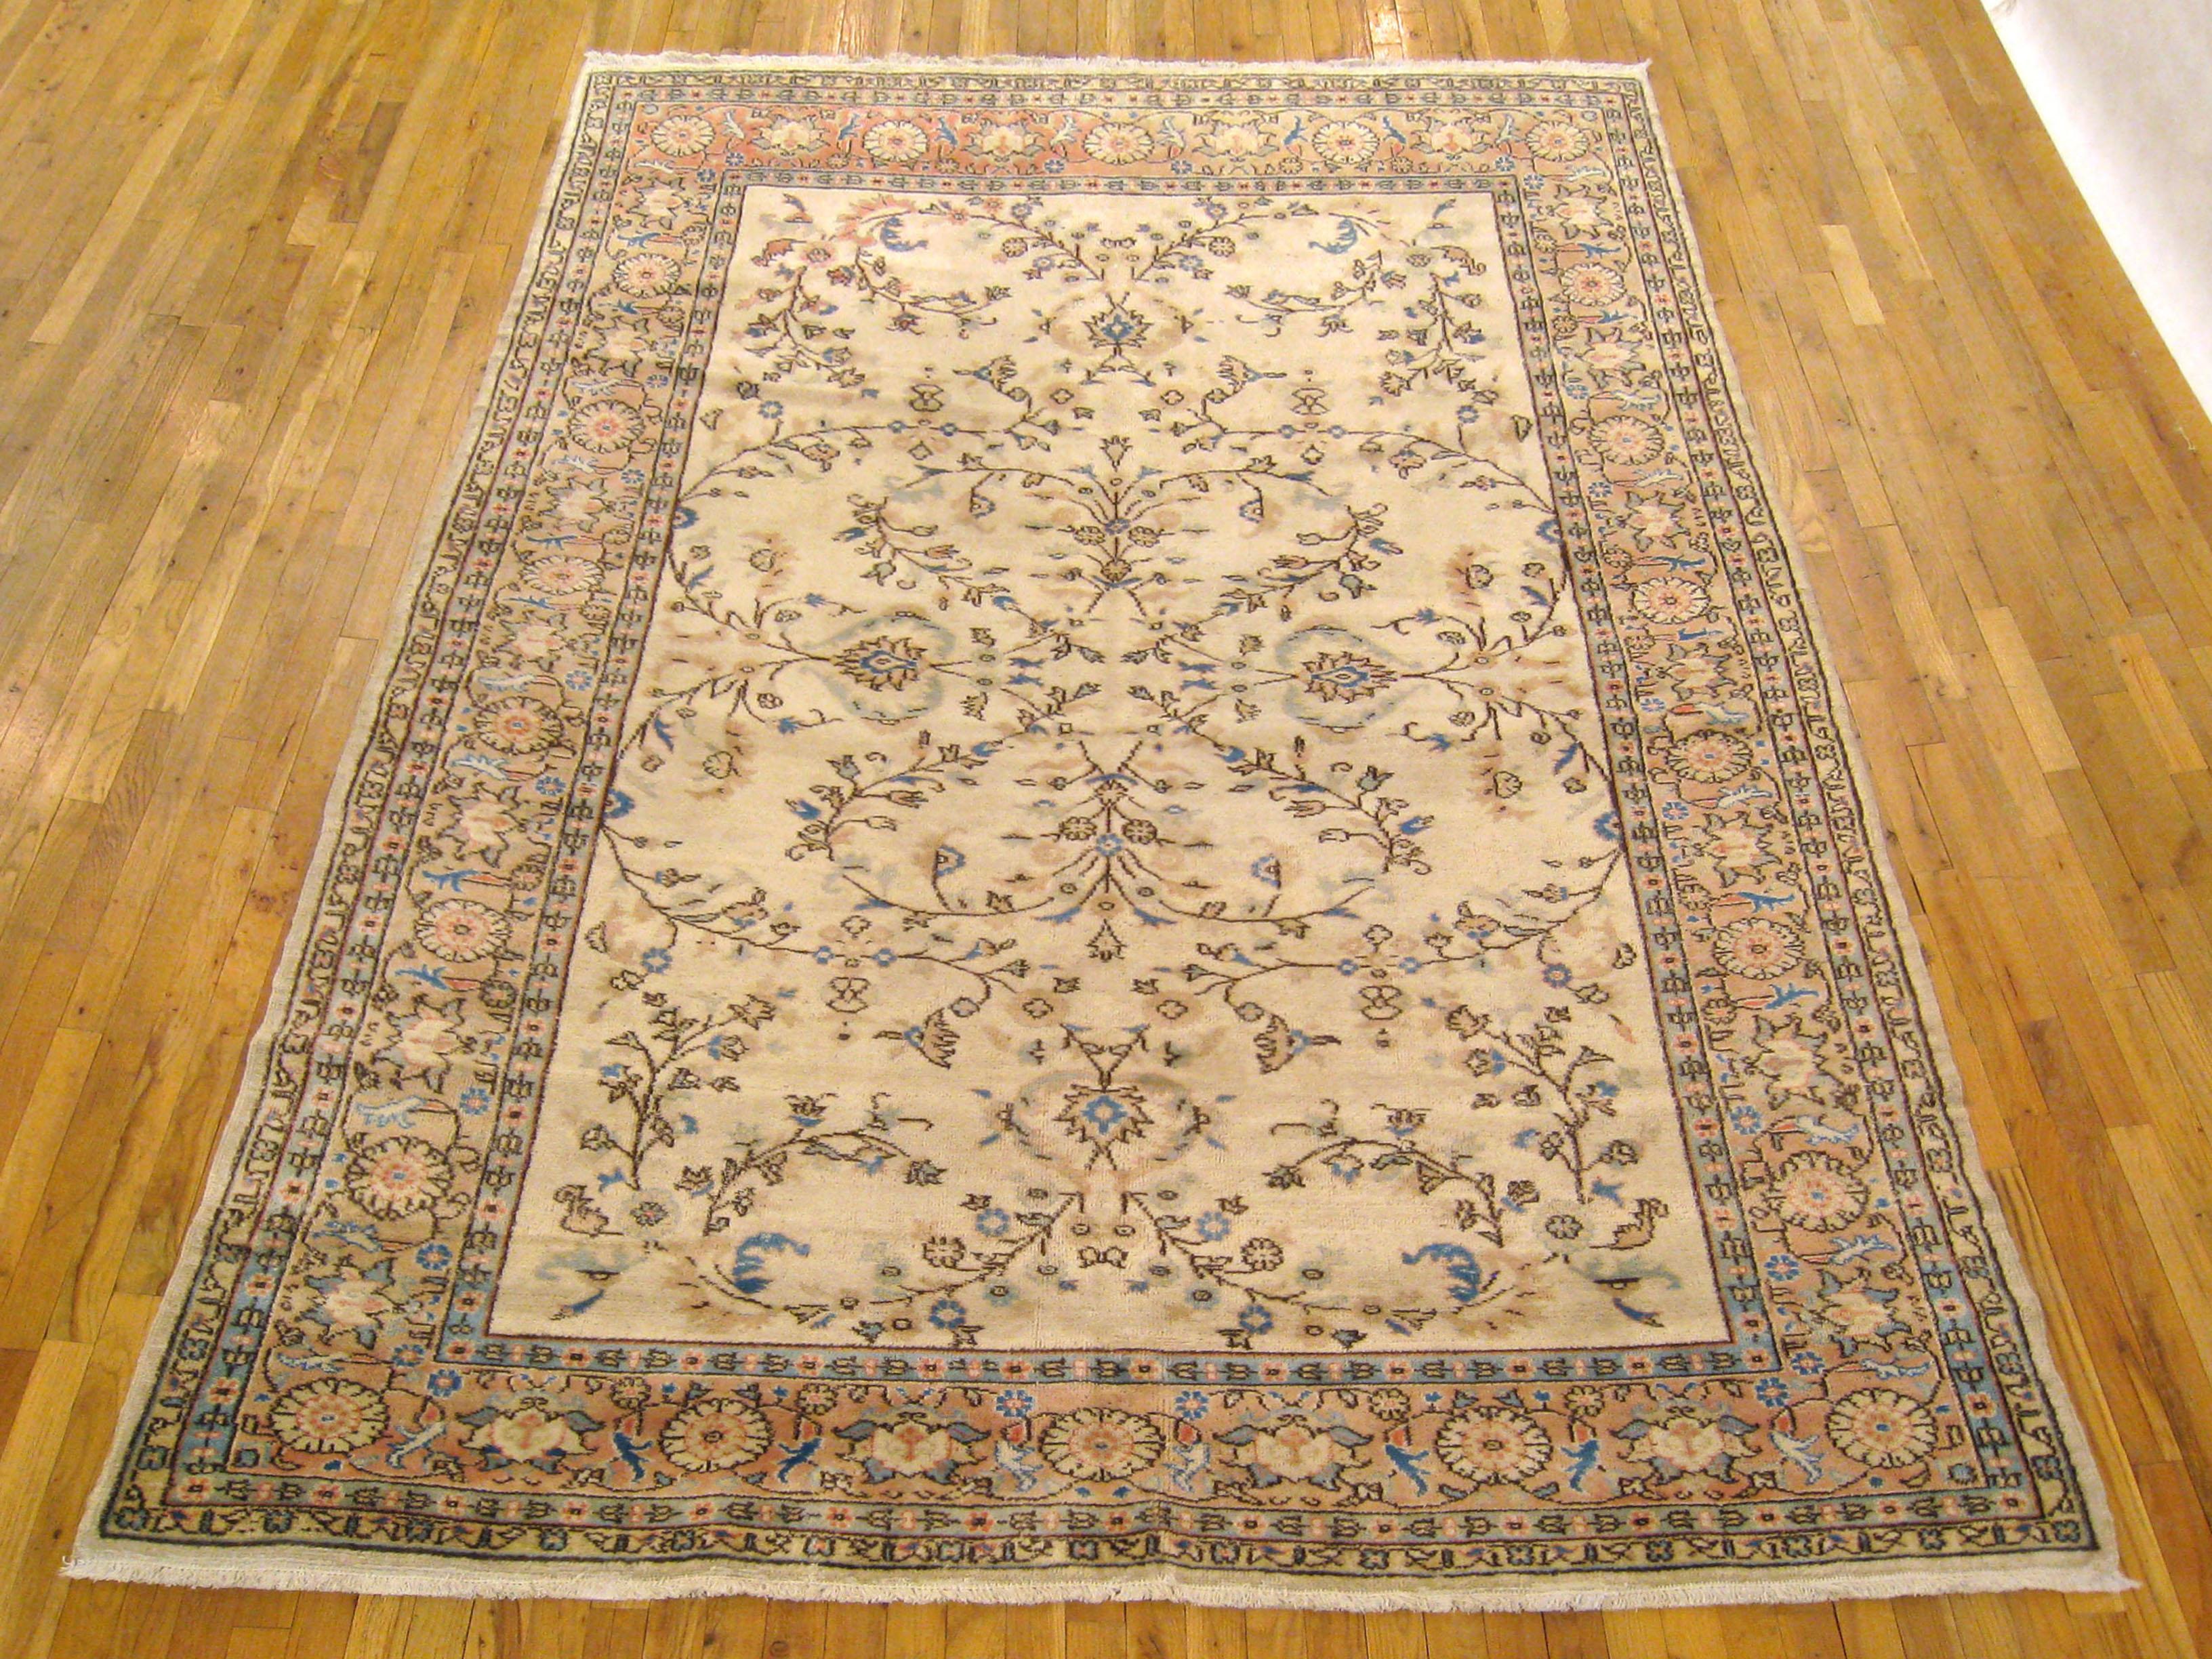 Antique Turkish oushak decorative oriental carpet, room size, with ivory field

A gorgeous antique Turkish Oushak carpet, circa 1900, size 10'1